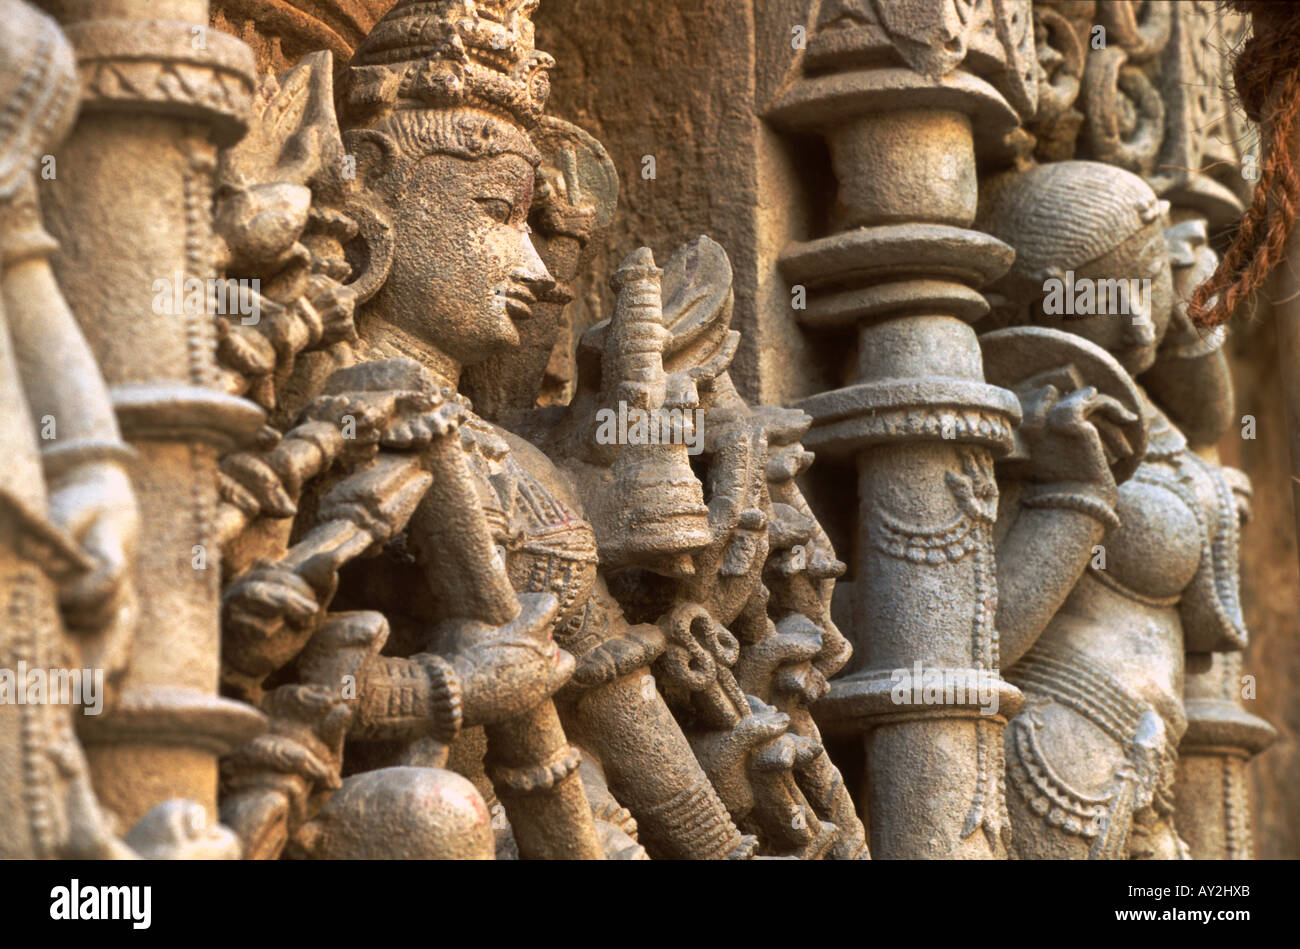 Carved stone figures, Patan step well called the Rani ki vav, Gujarat, India. Built about 1050 A.D. Stock Photo